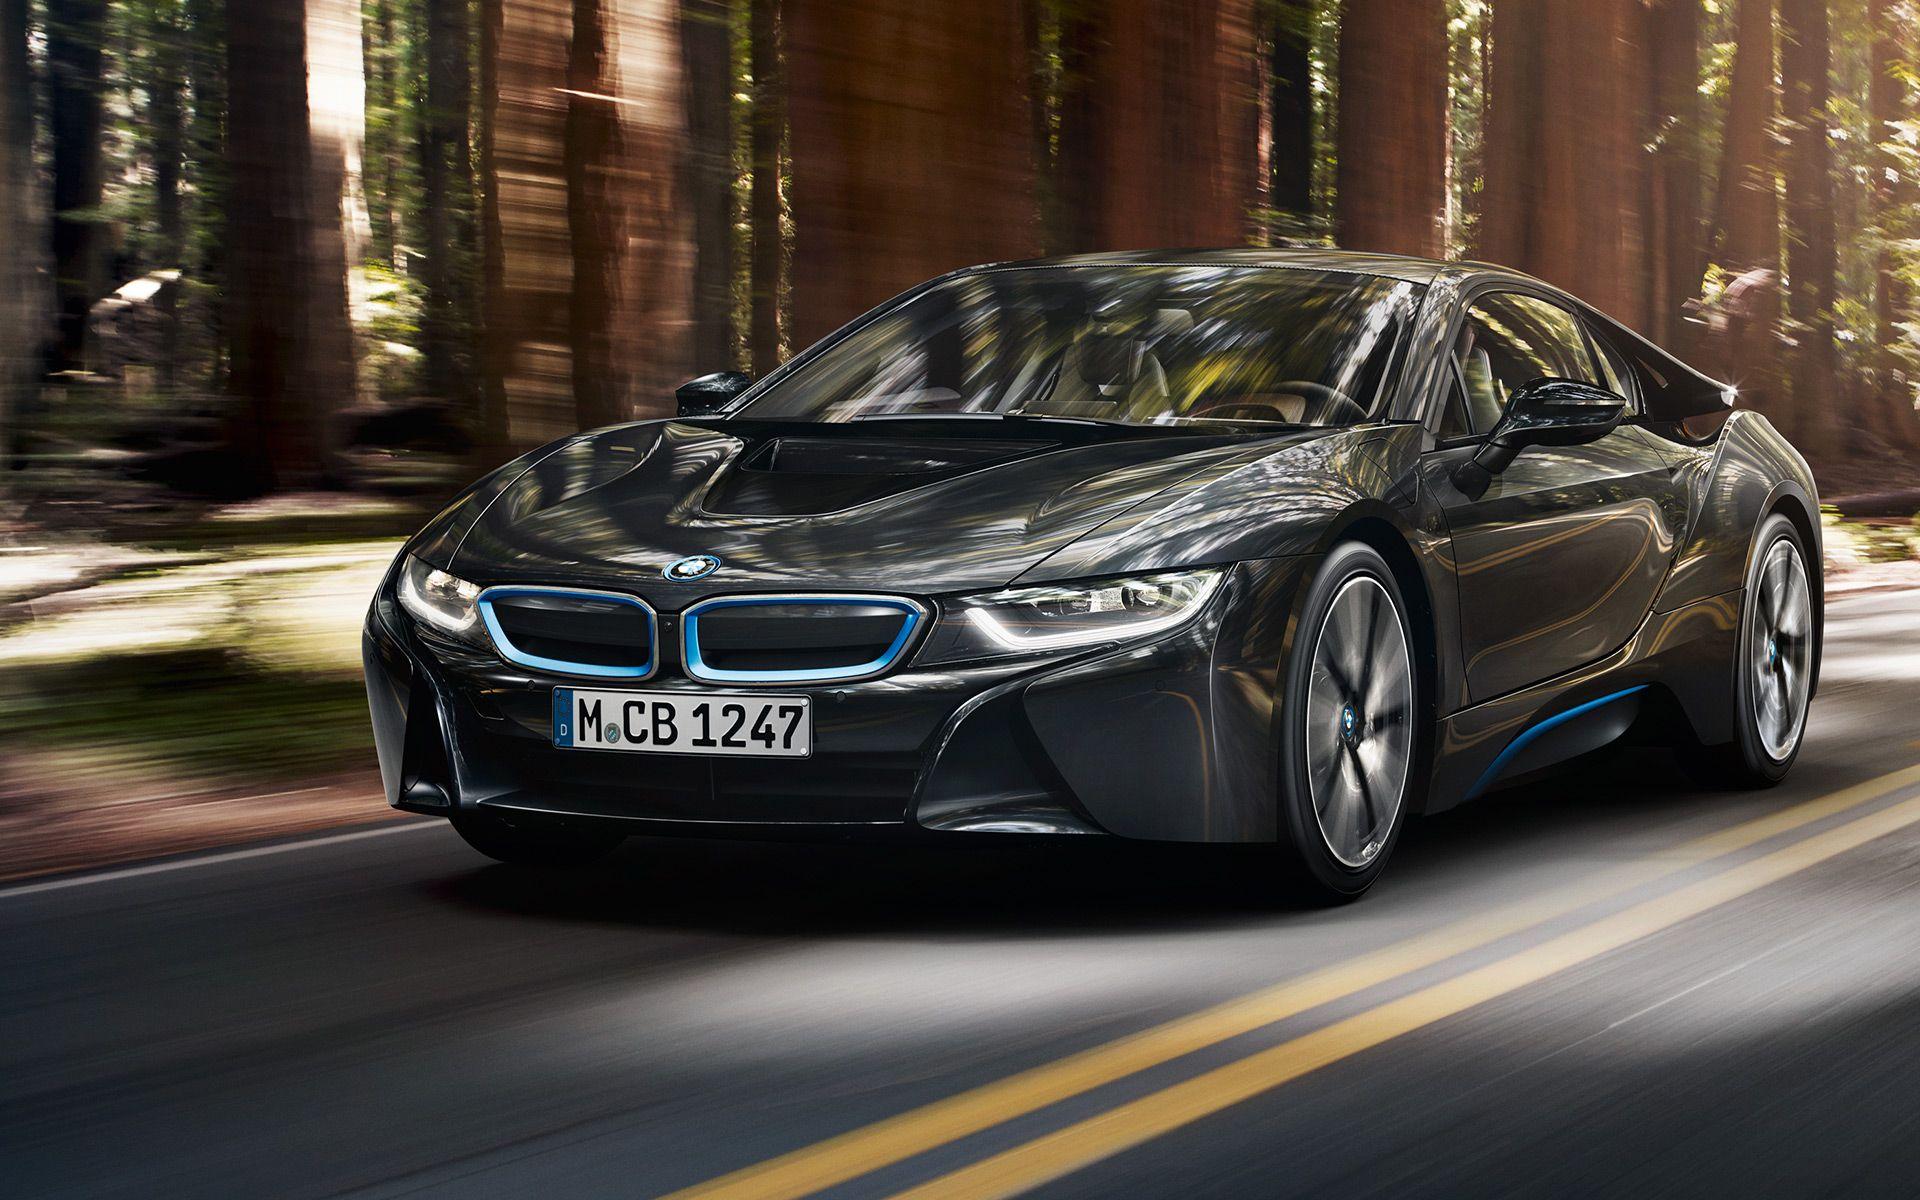 BMW i8, Image and videos